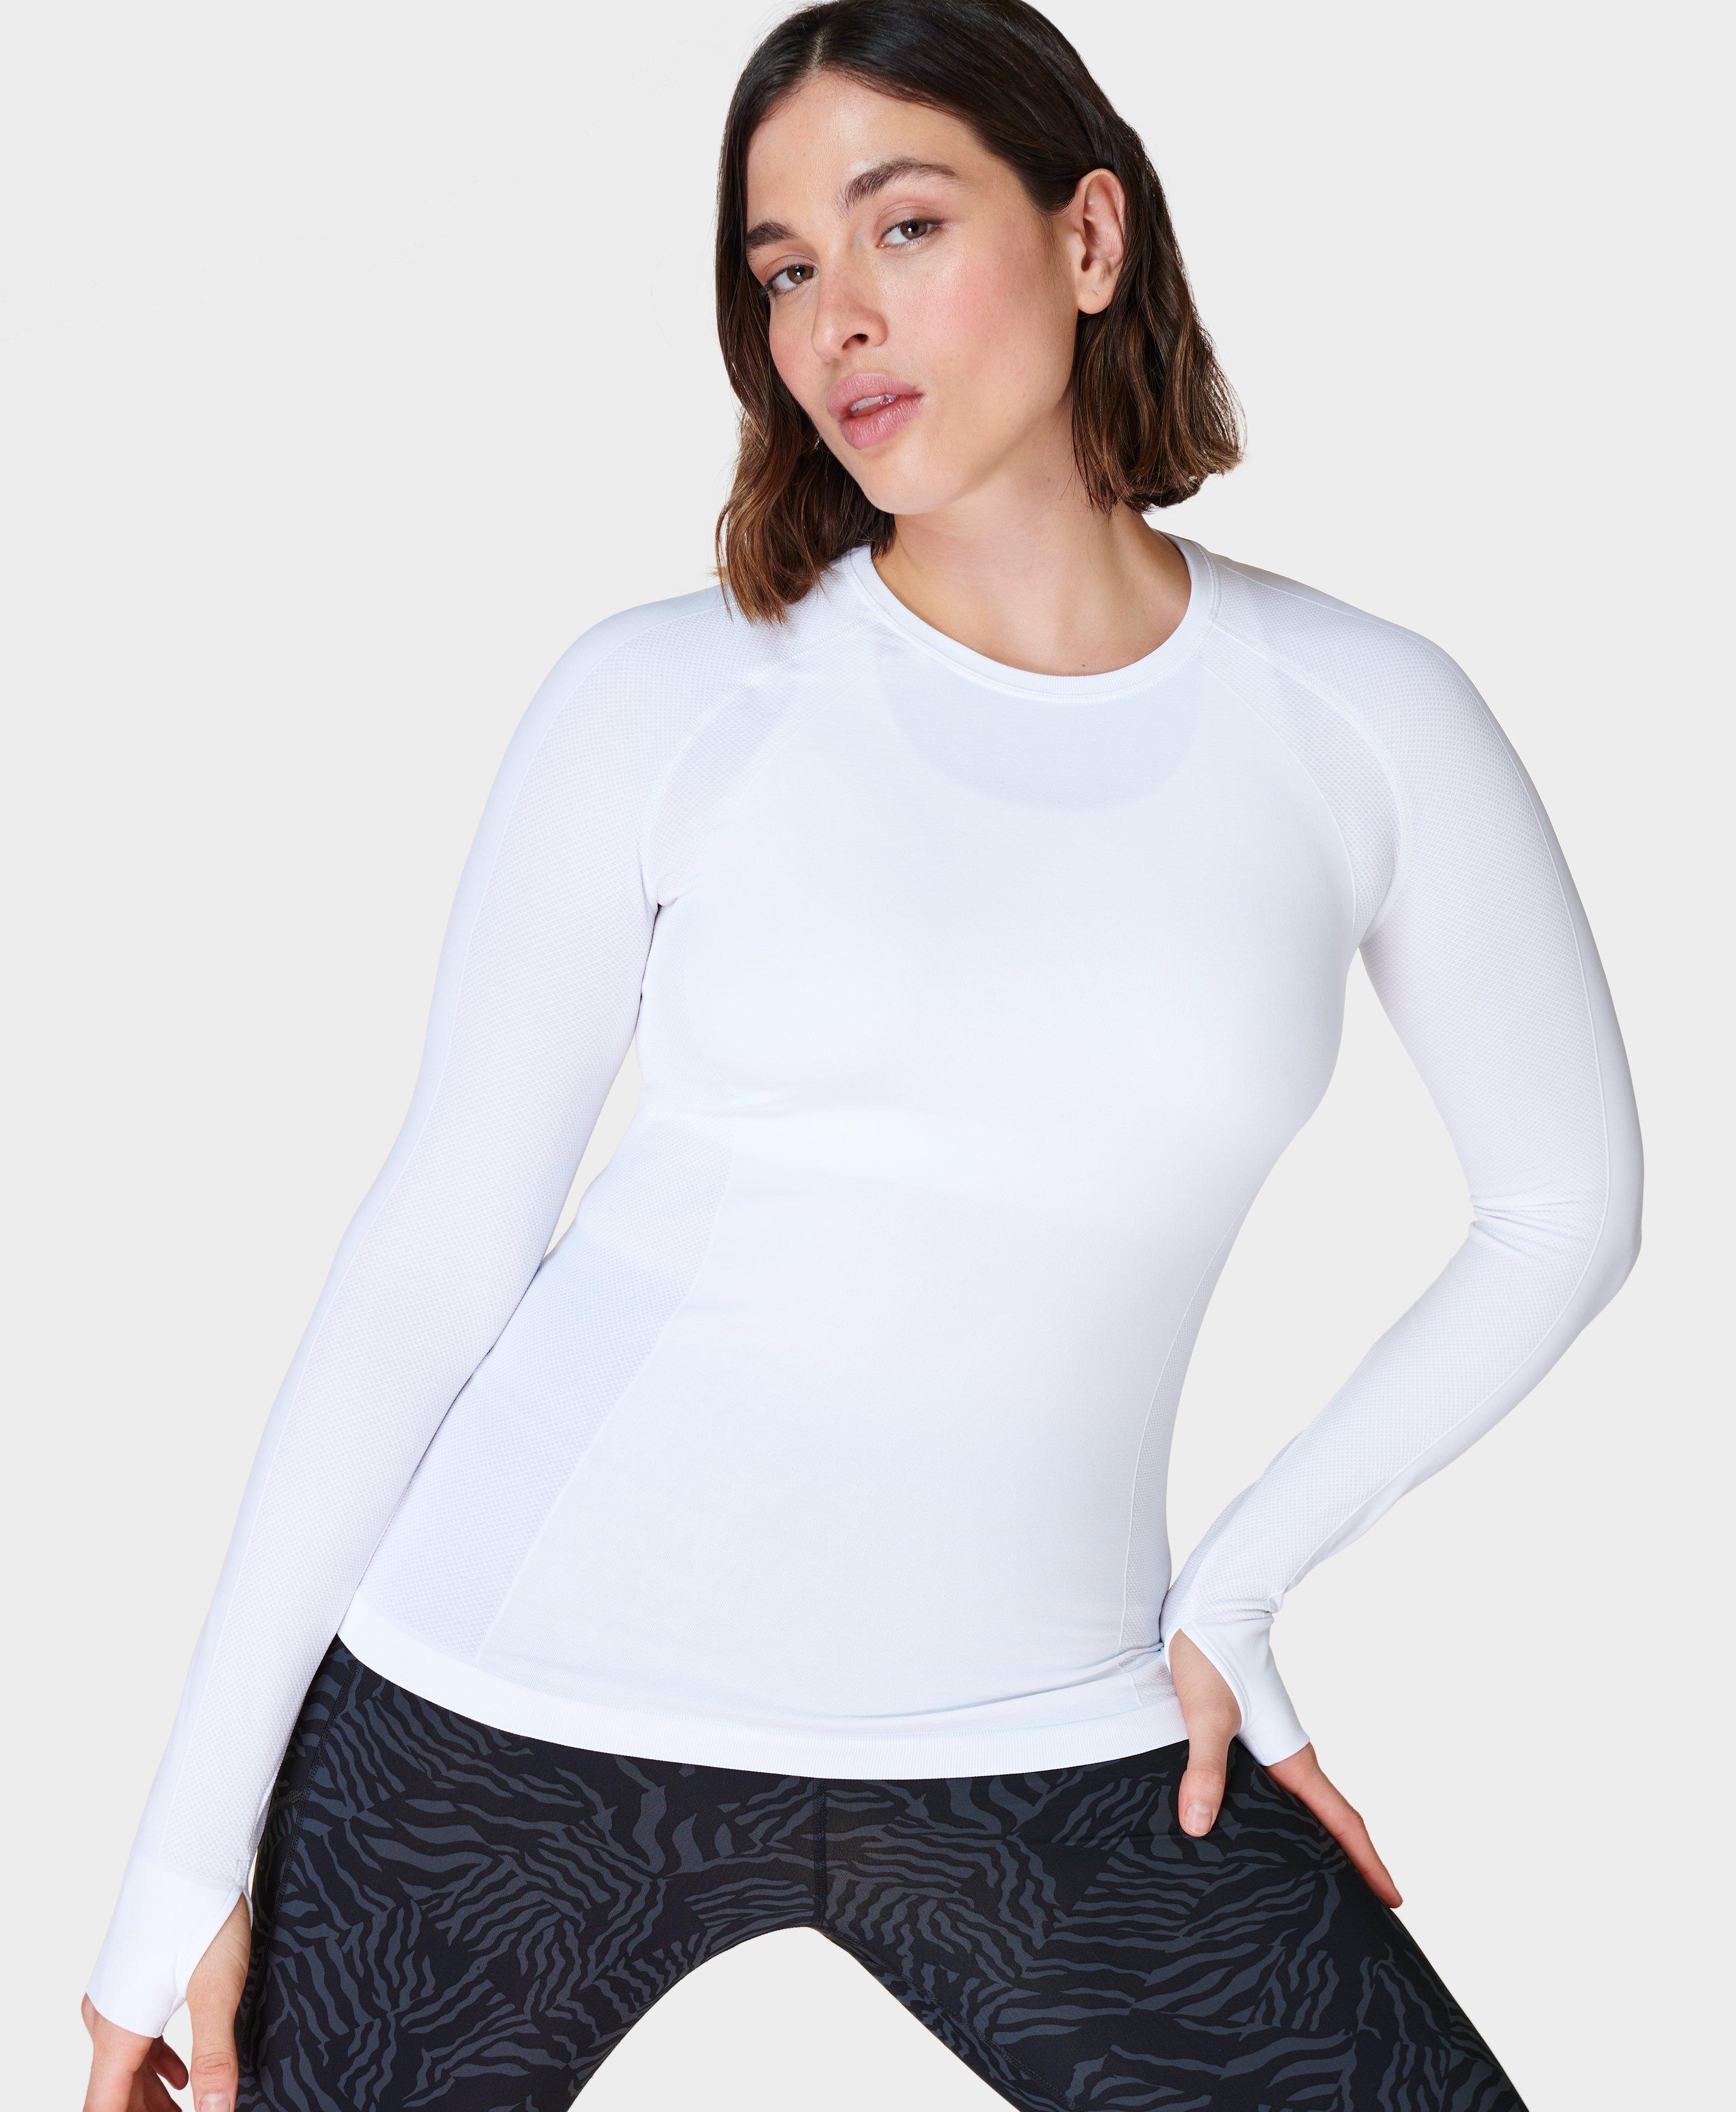 All Clothing, Activewear